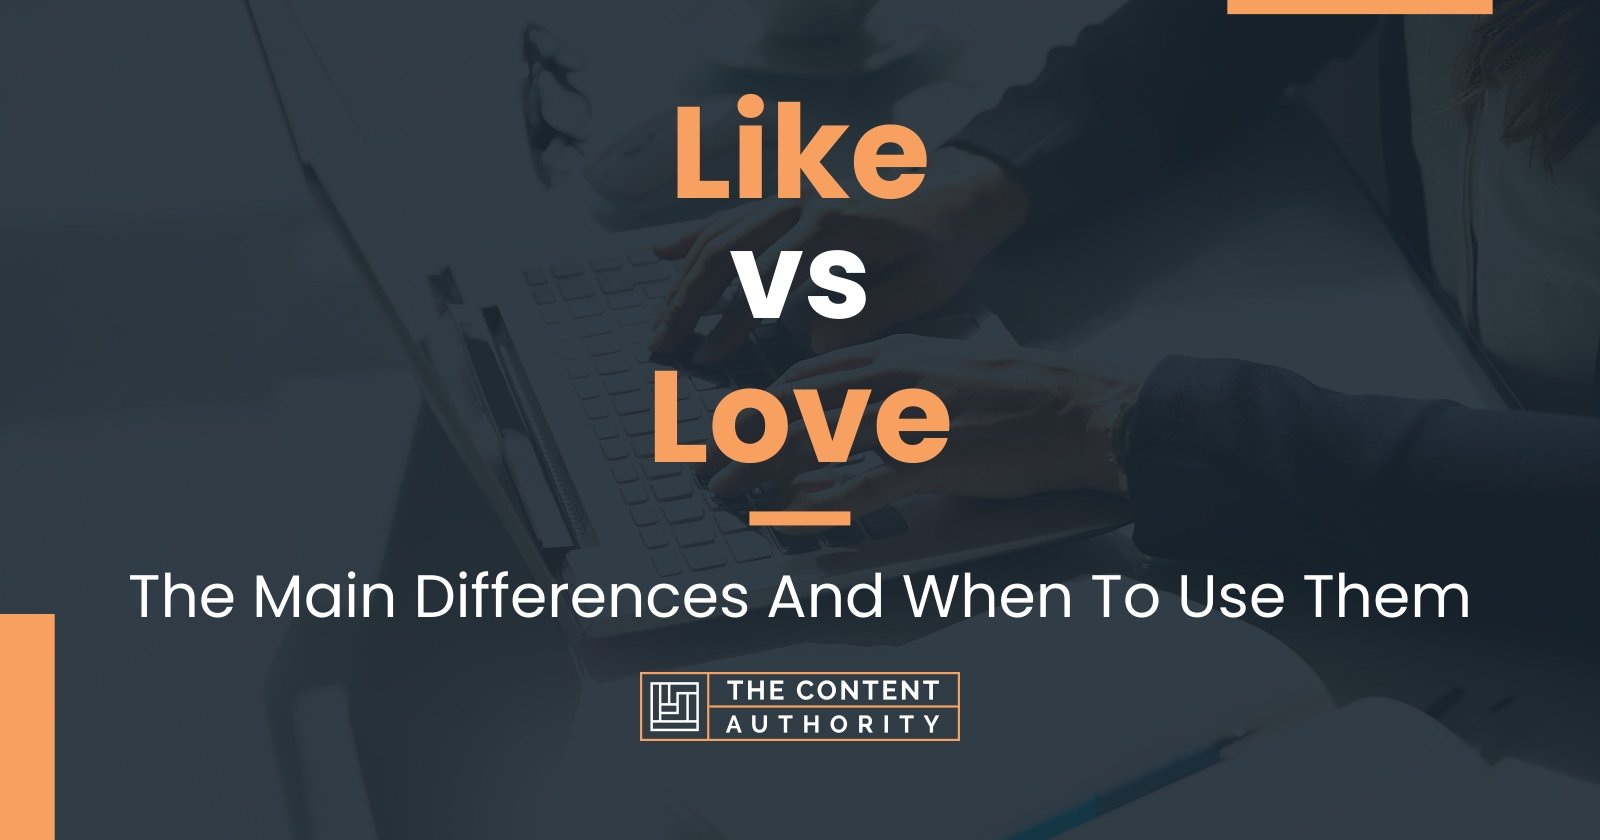 Like vs Love: The Main Differences And When To Use Them